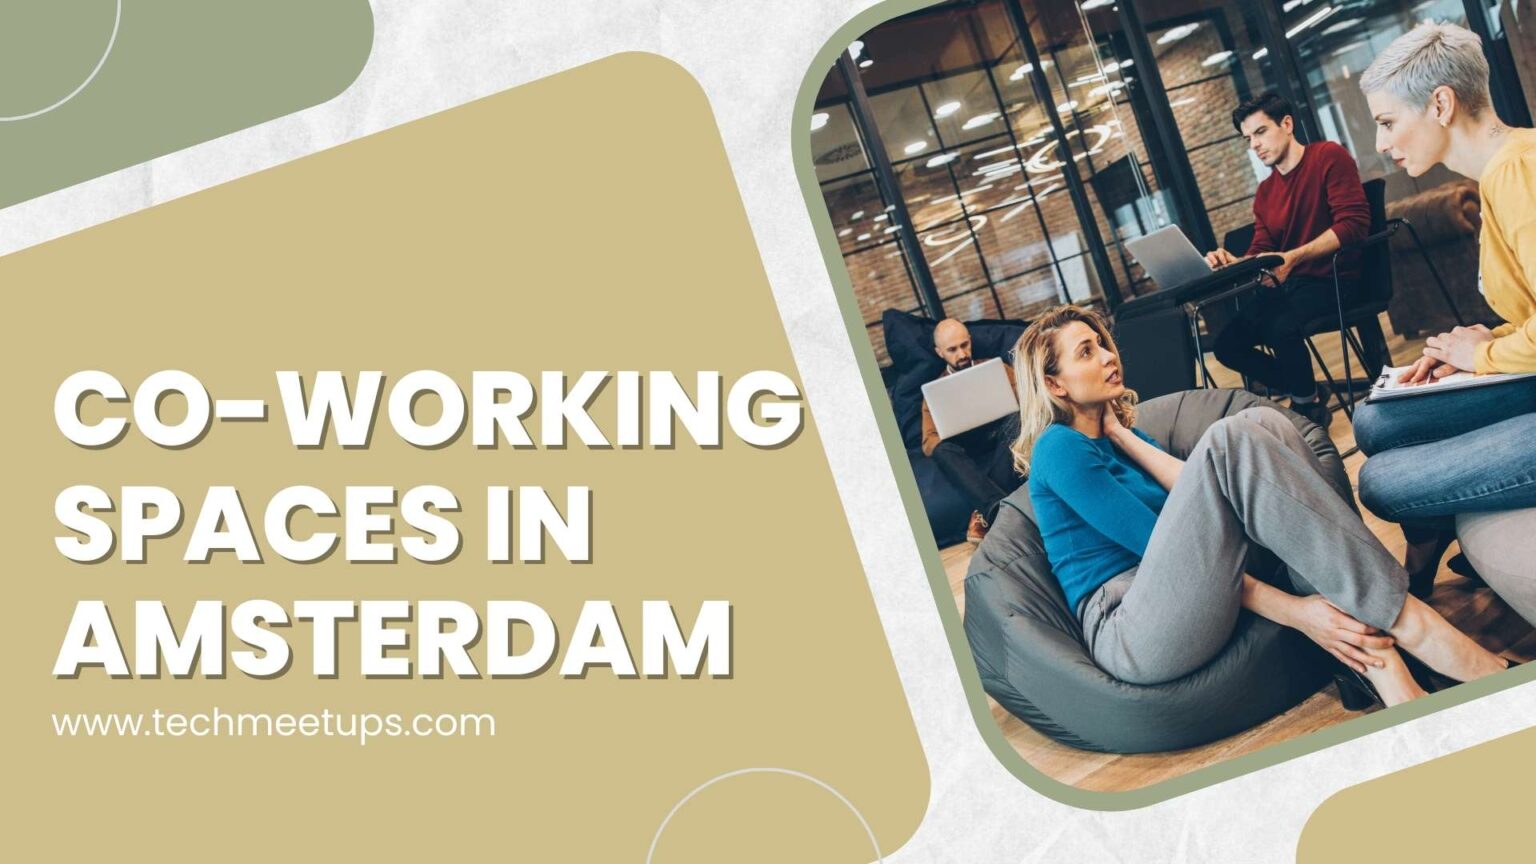 Top 10 Co-working Spaces in Amsterdam